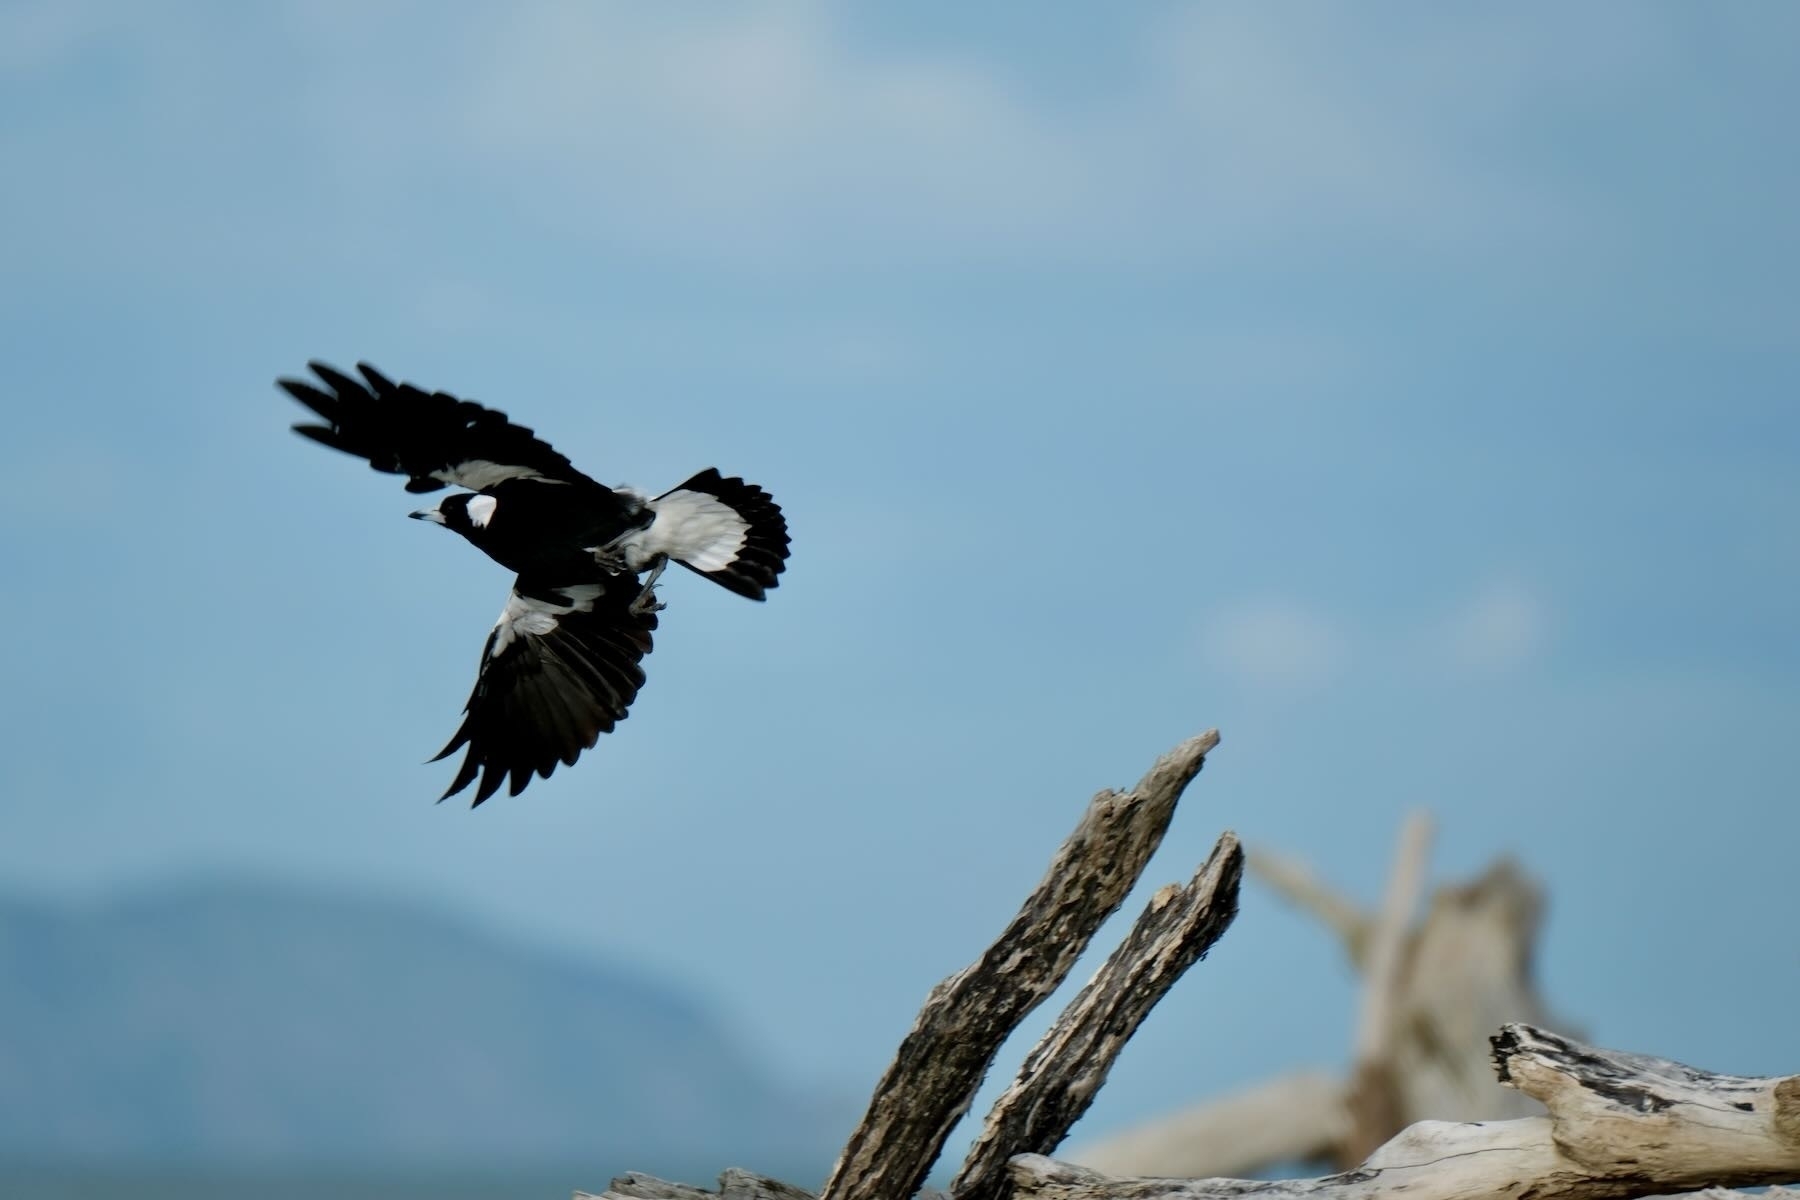 View from below the Magpie as it flies off with wings spread. 